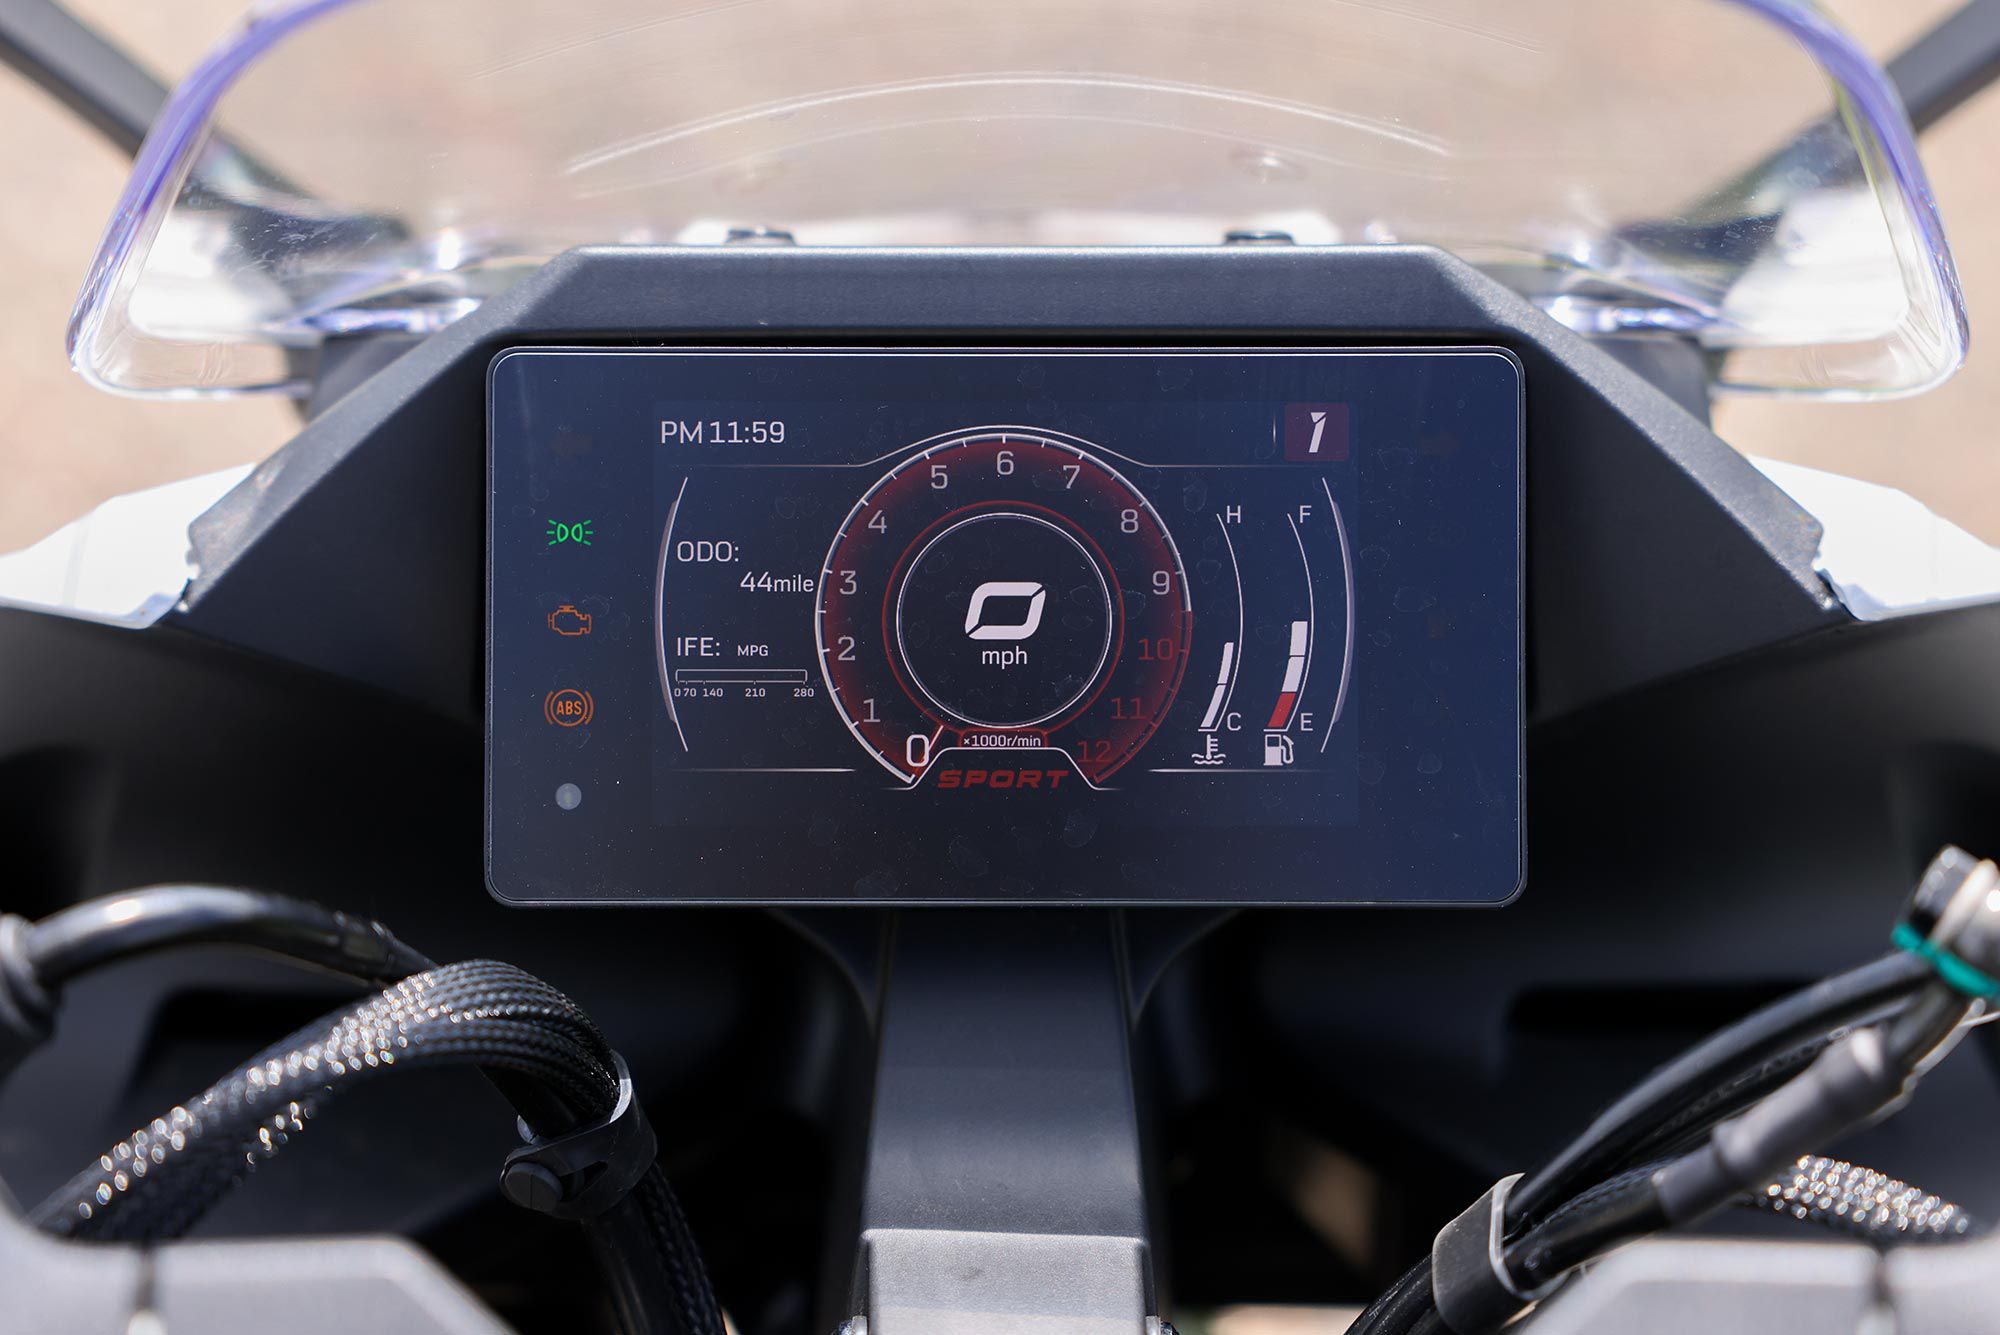 One of the standout items across CFMoto’s 300 lineup is the 5-inch TFT display that comes standard.